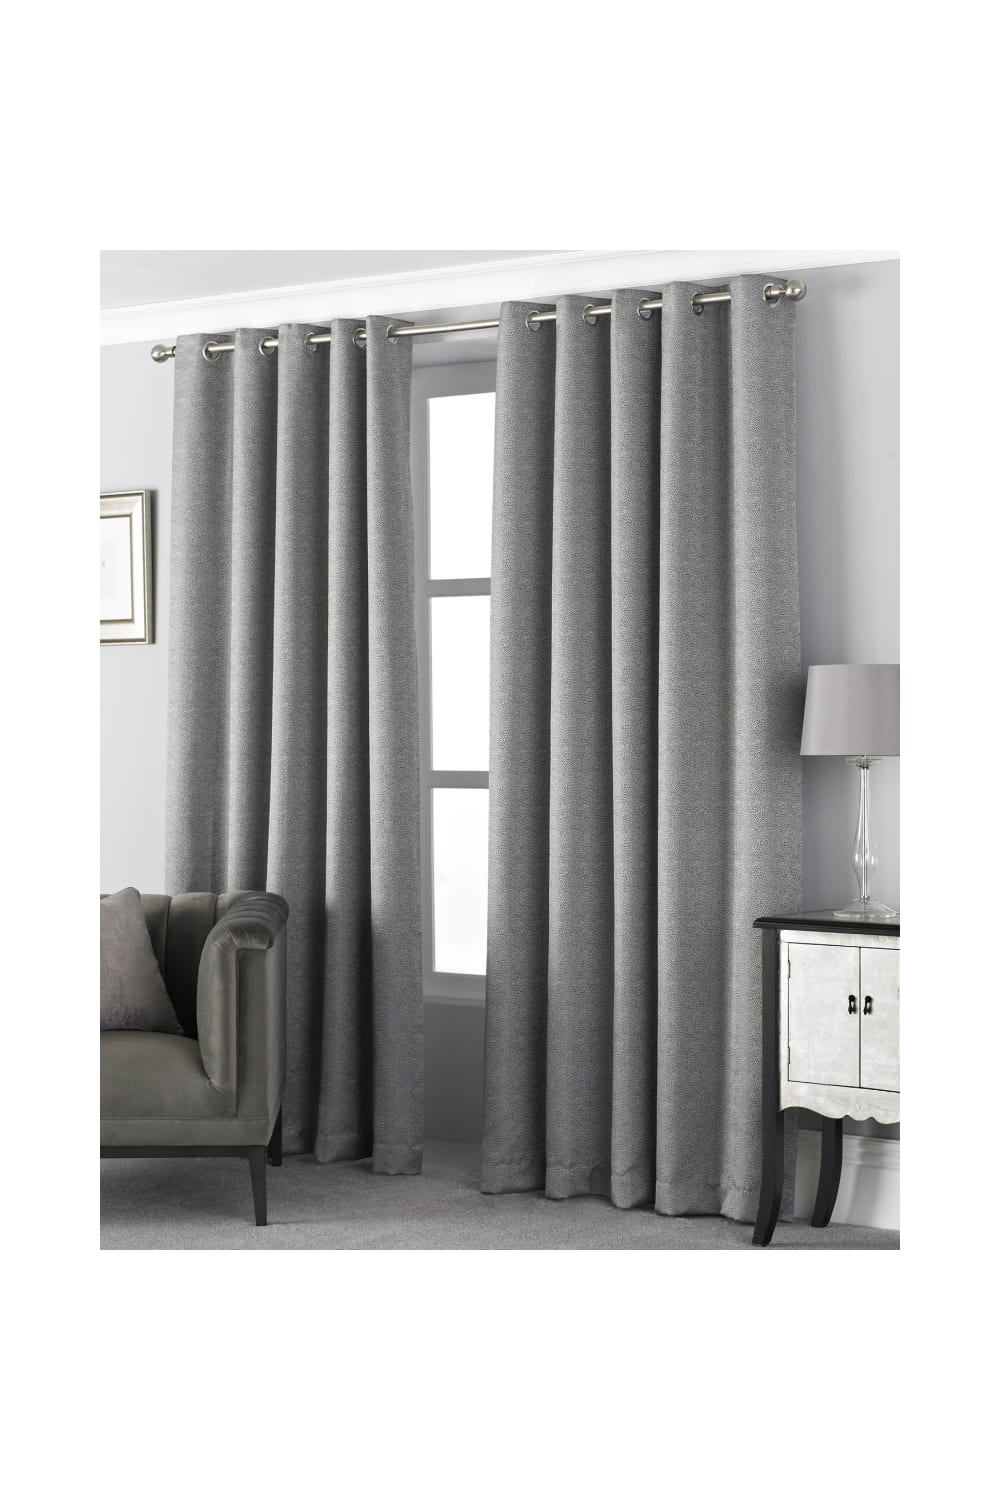 Riva Home Pendleton Ringtop Eyelet Curtains (Graphite) (66 x 54in)